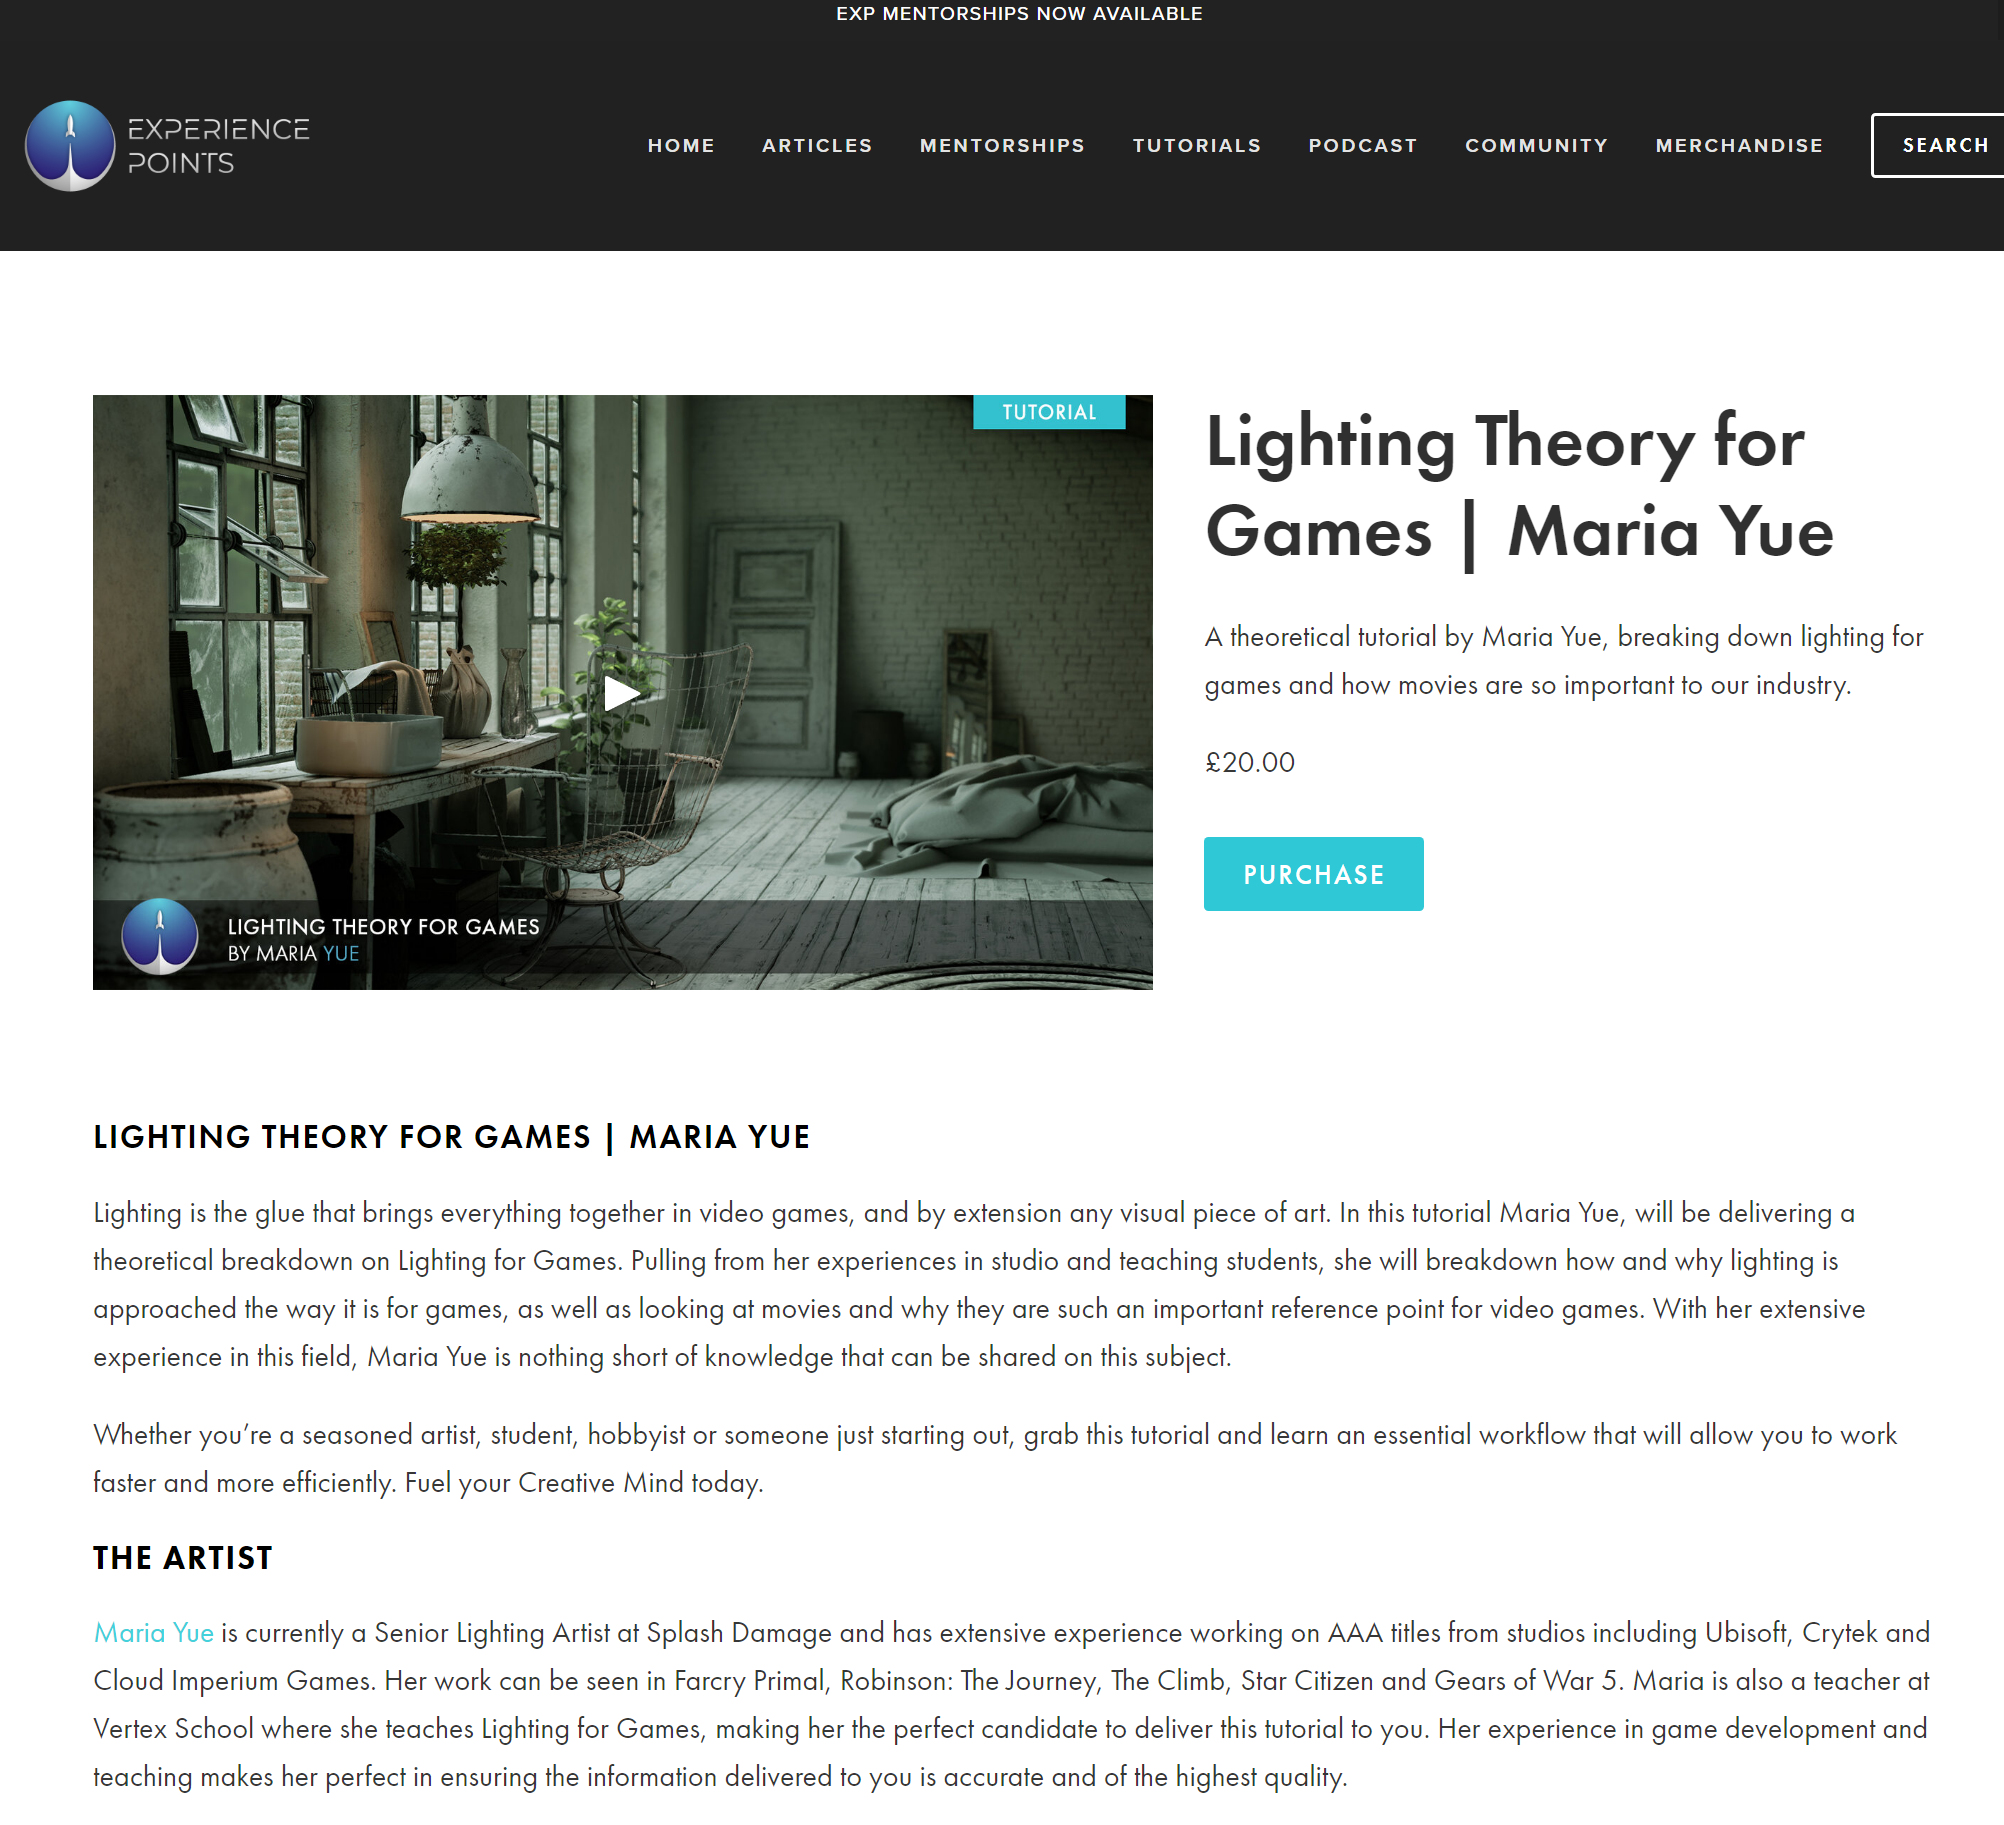 Lighting theory for games